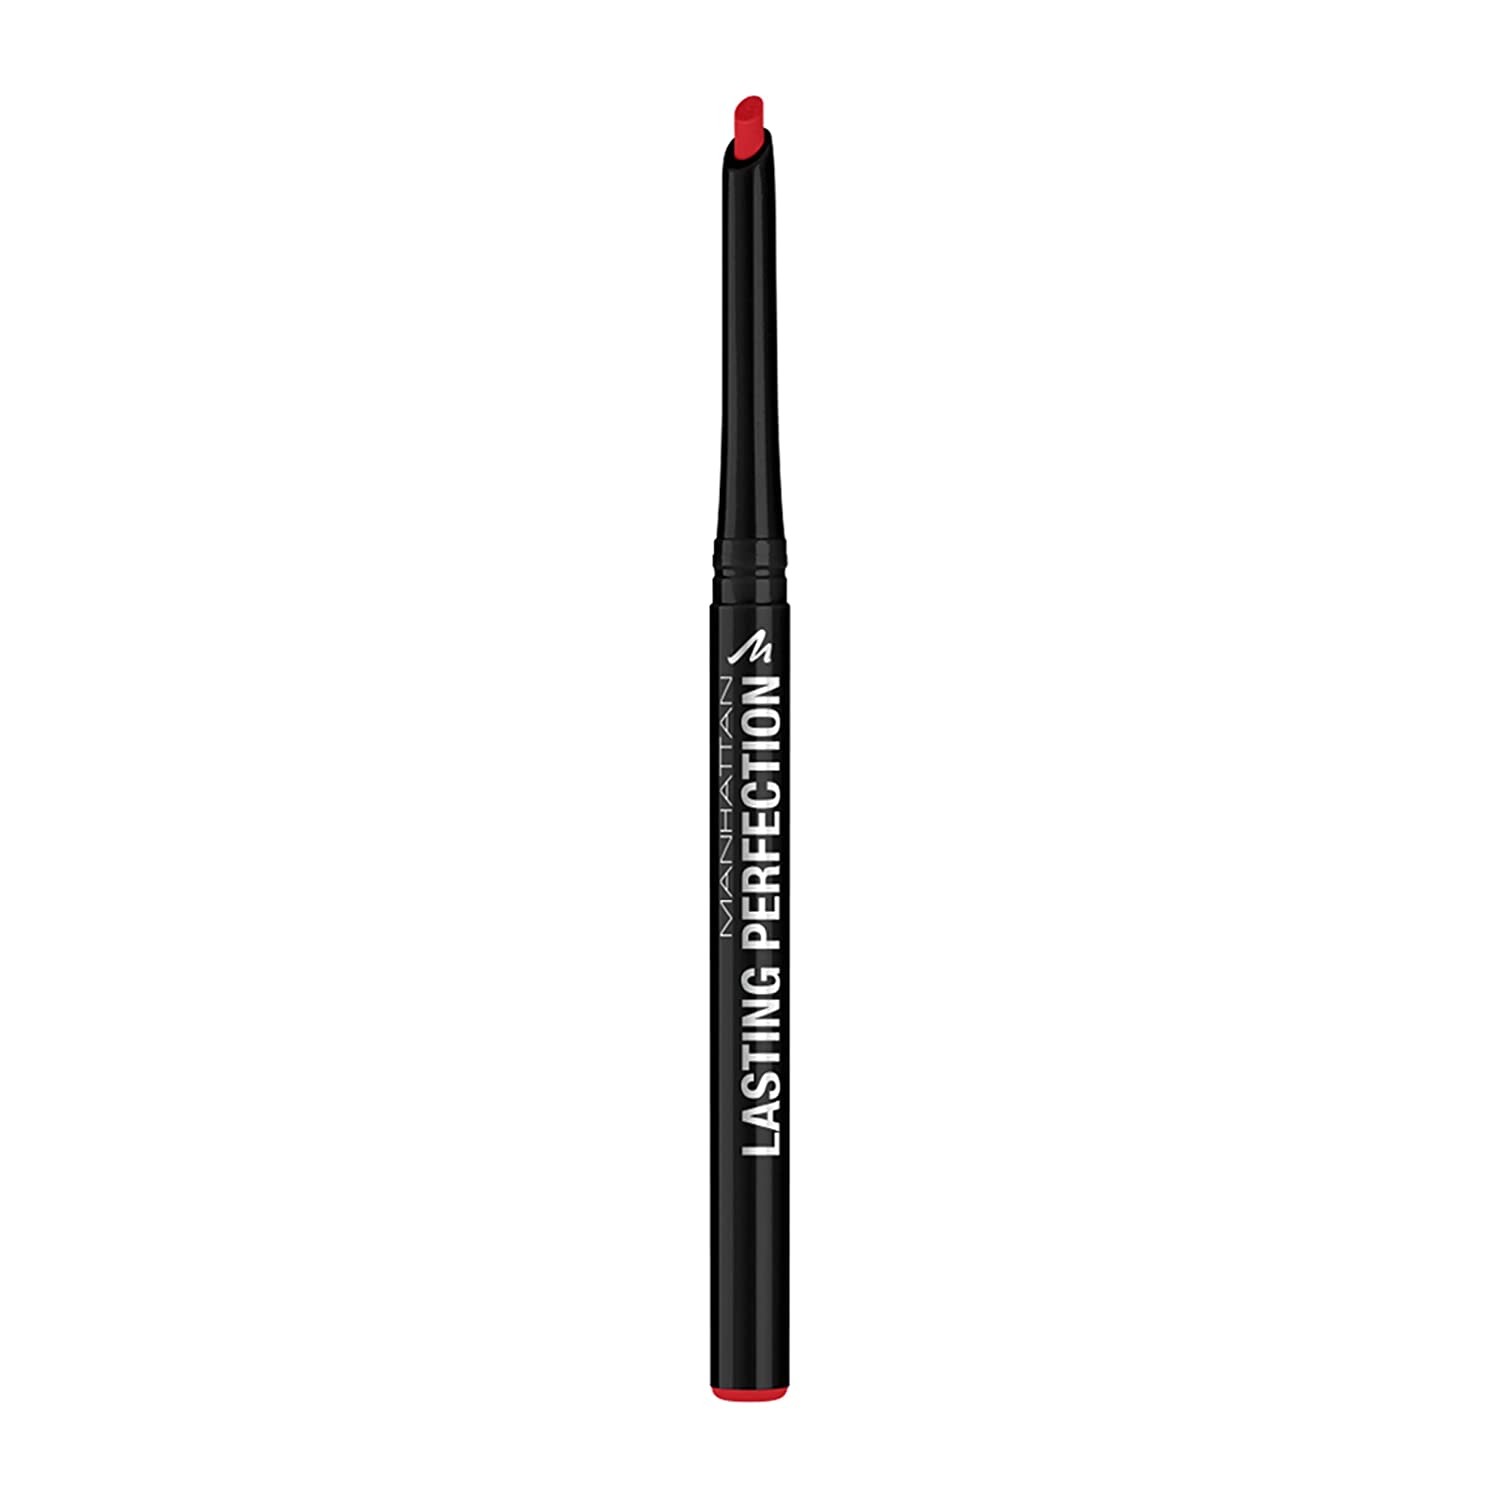 Manhattan Lasting Perfection Lip Liner Colour 24 Red Diva Long Lasting Opaque Contour Pen 2g, ‎red